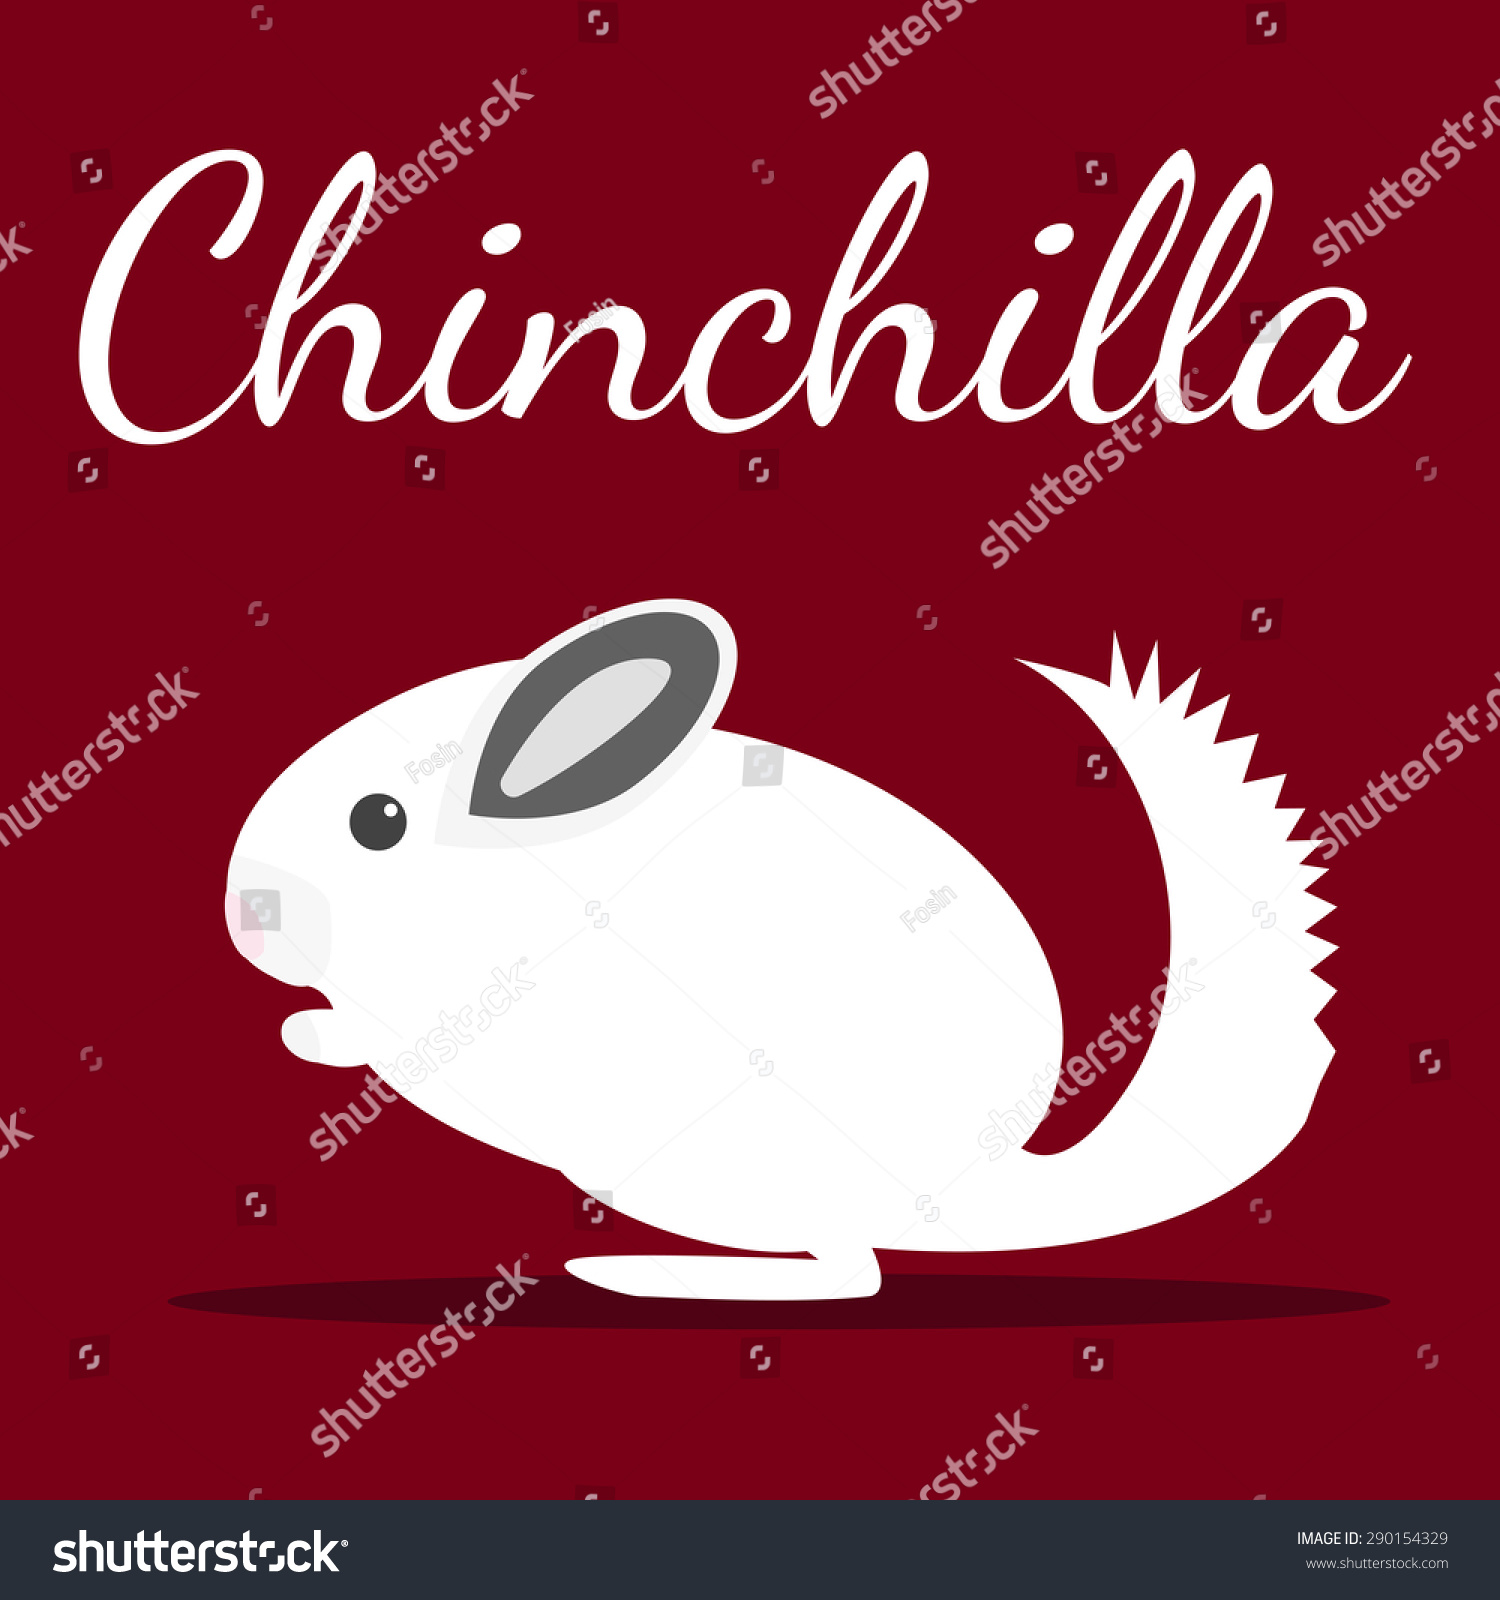 SVG of Chinchilla. Vector illustration. Pet icon in flat style design. svg